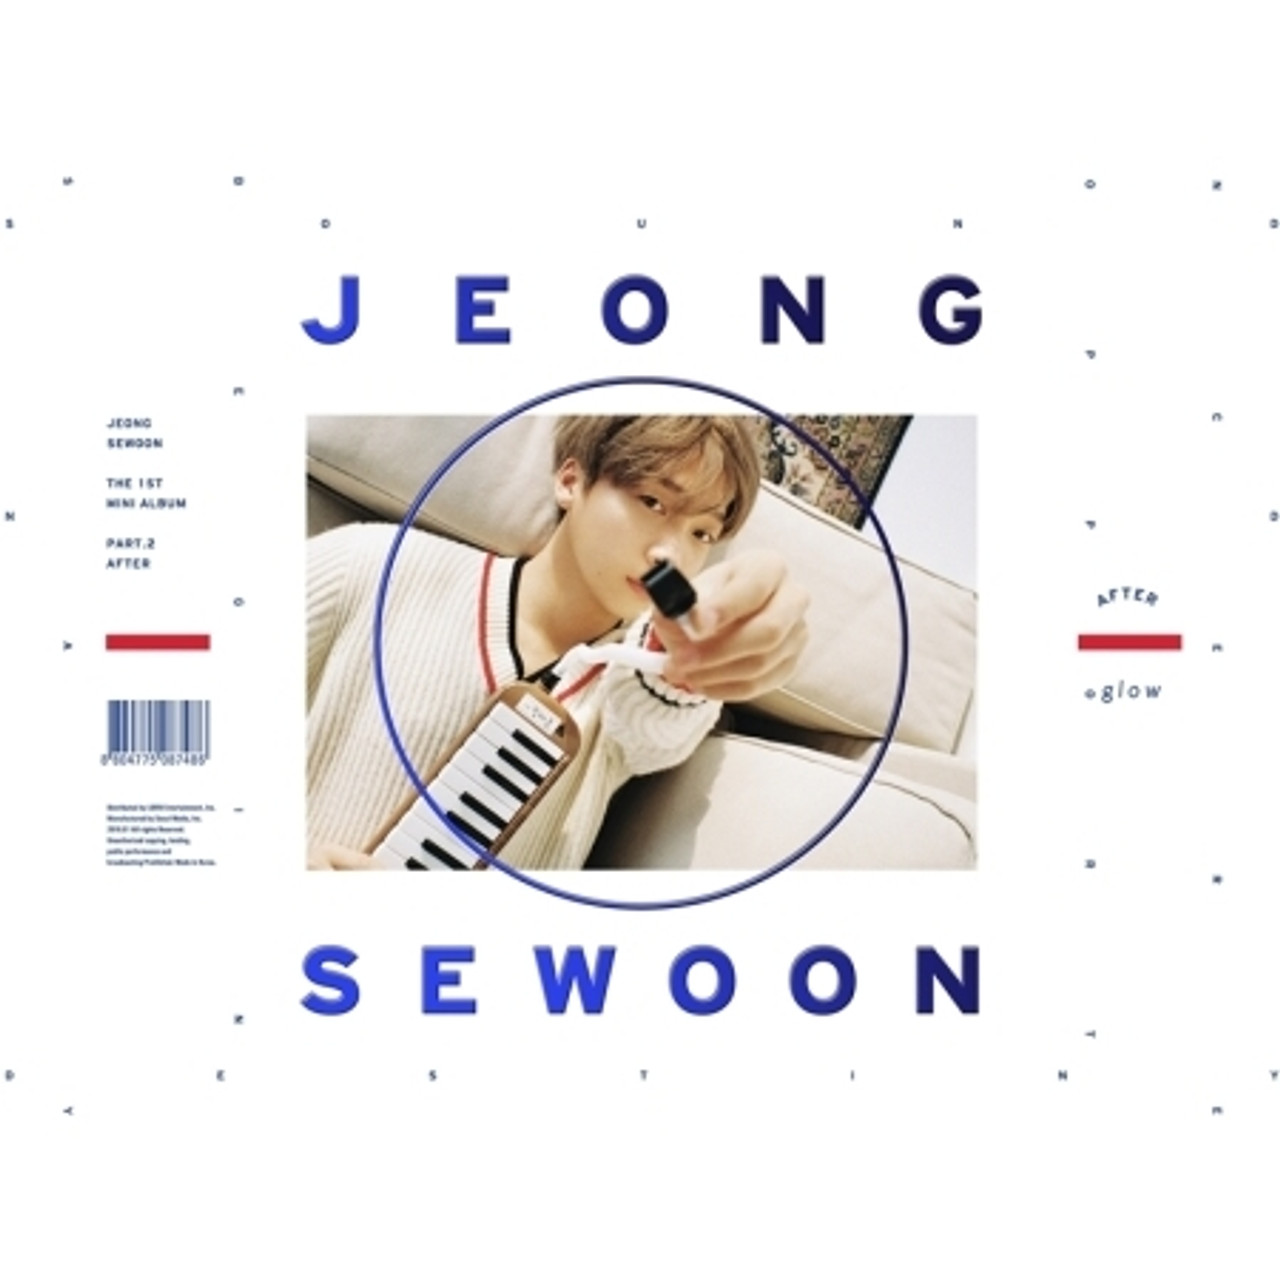 JEONG SEWOON  1st Mini PART2 AFTER Glow